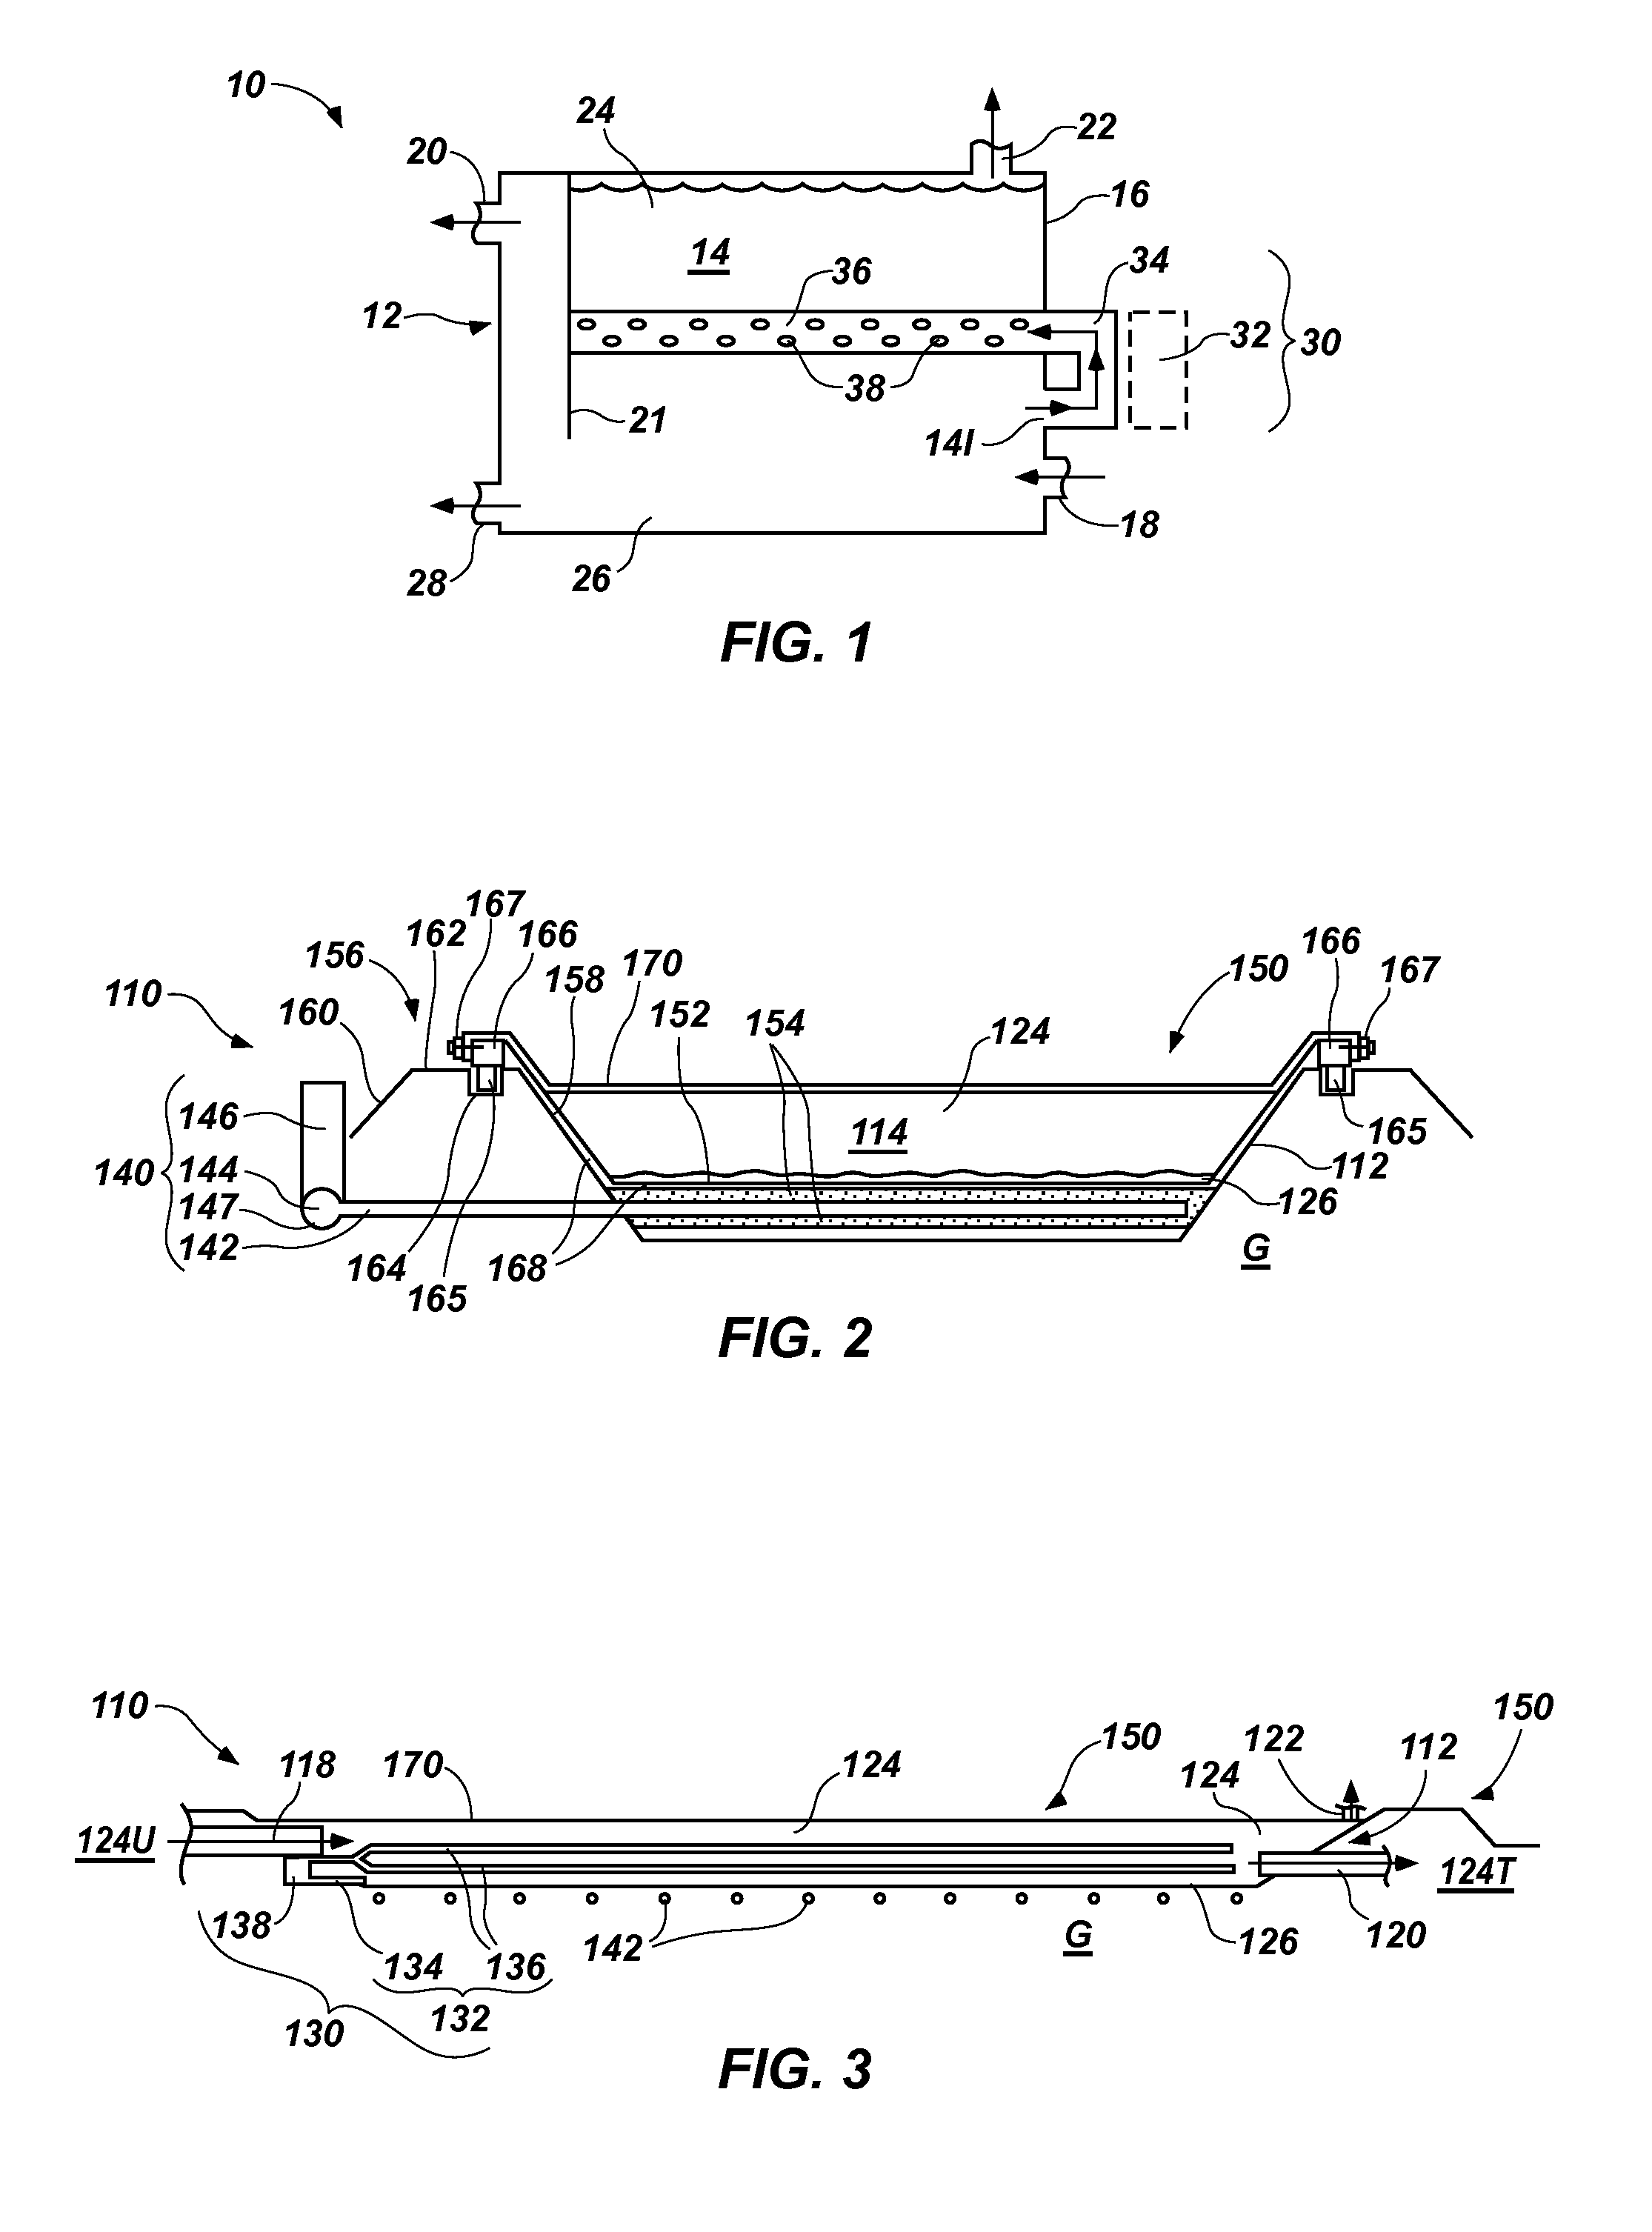 Methods for treating wastewater from exploration for and production of  oil and gas